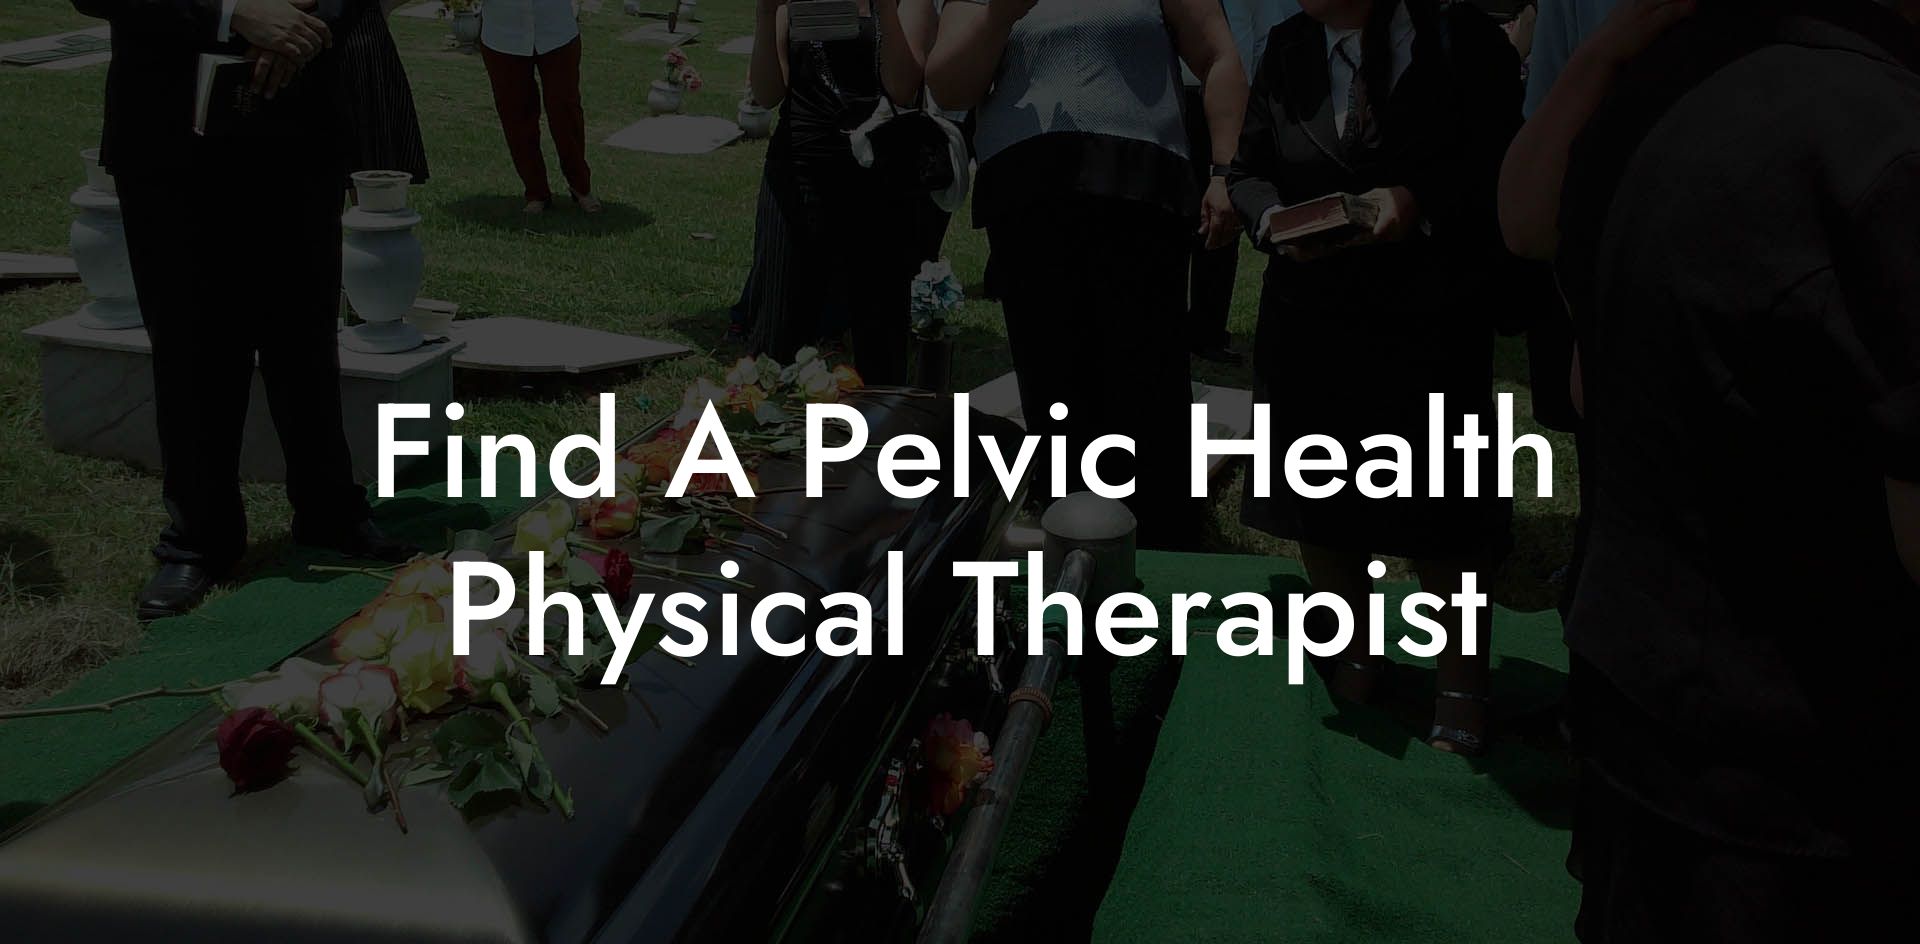 Find A Pelvic Health Physical Therapist